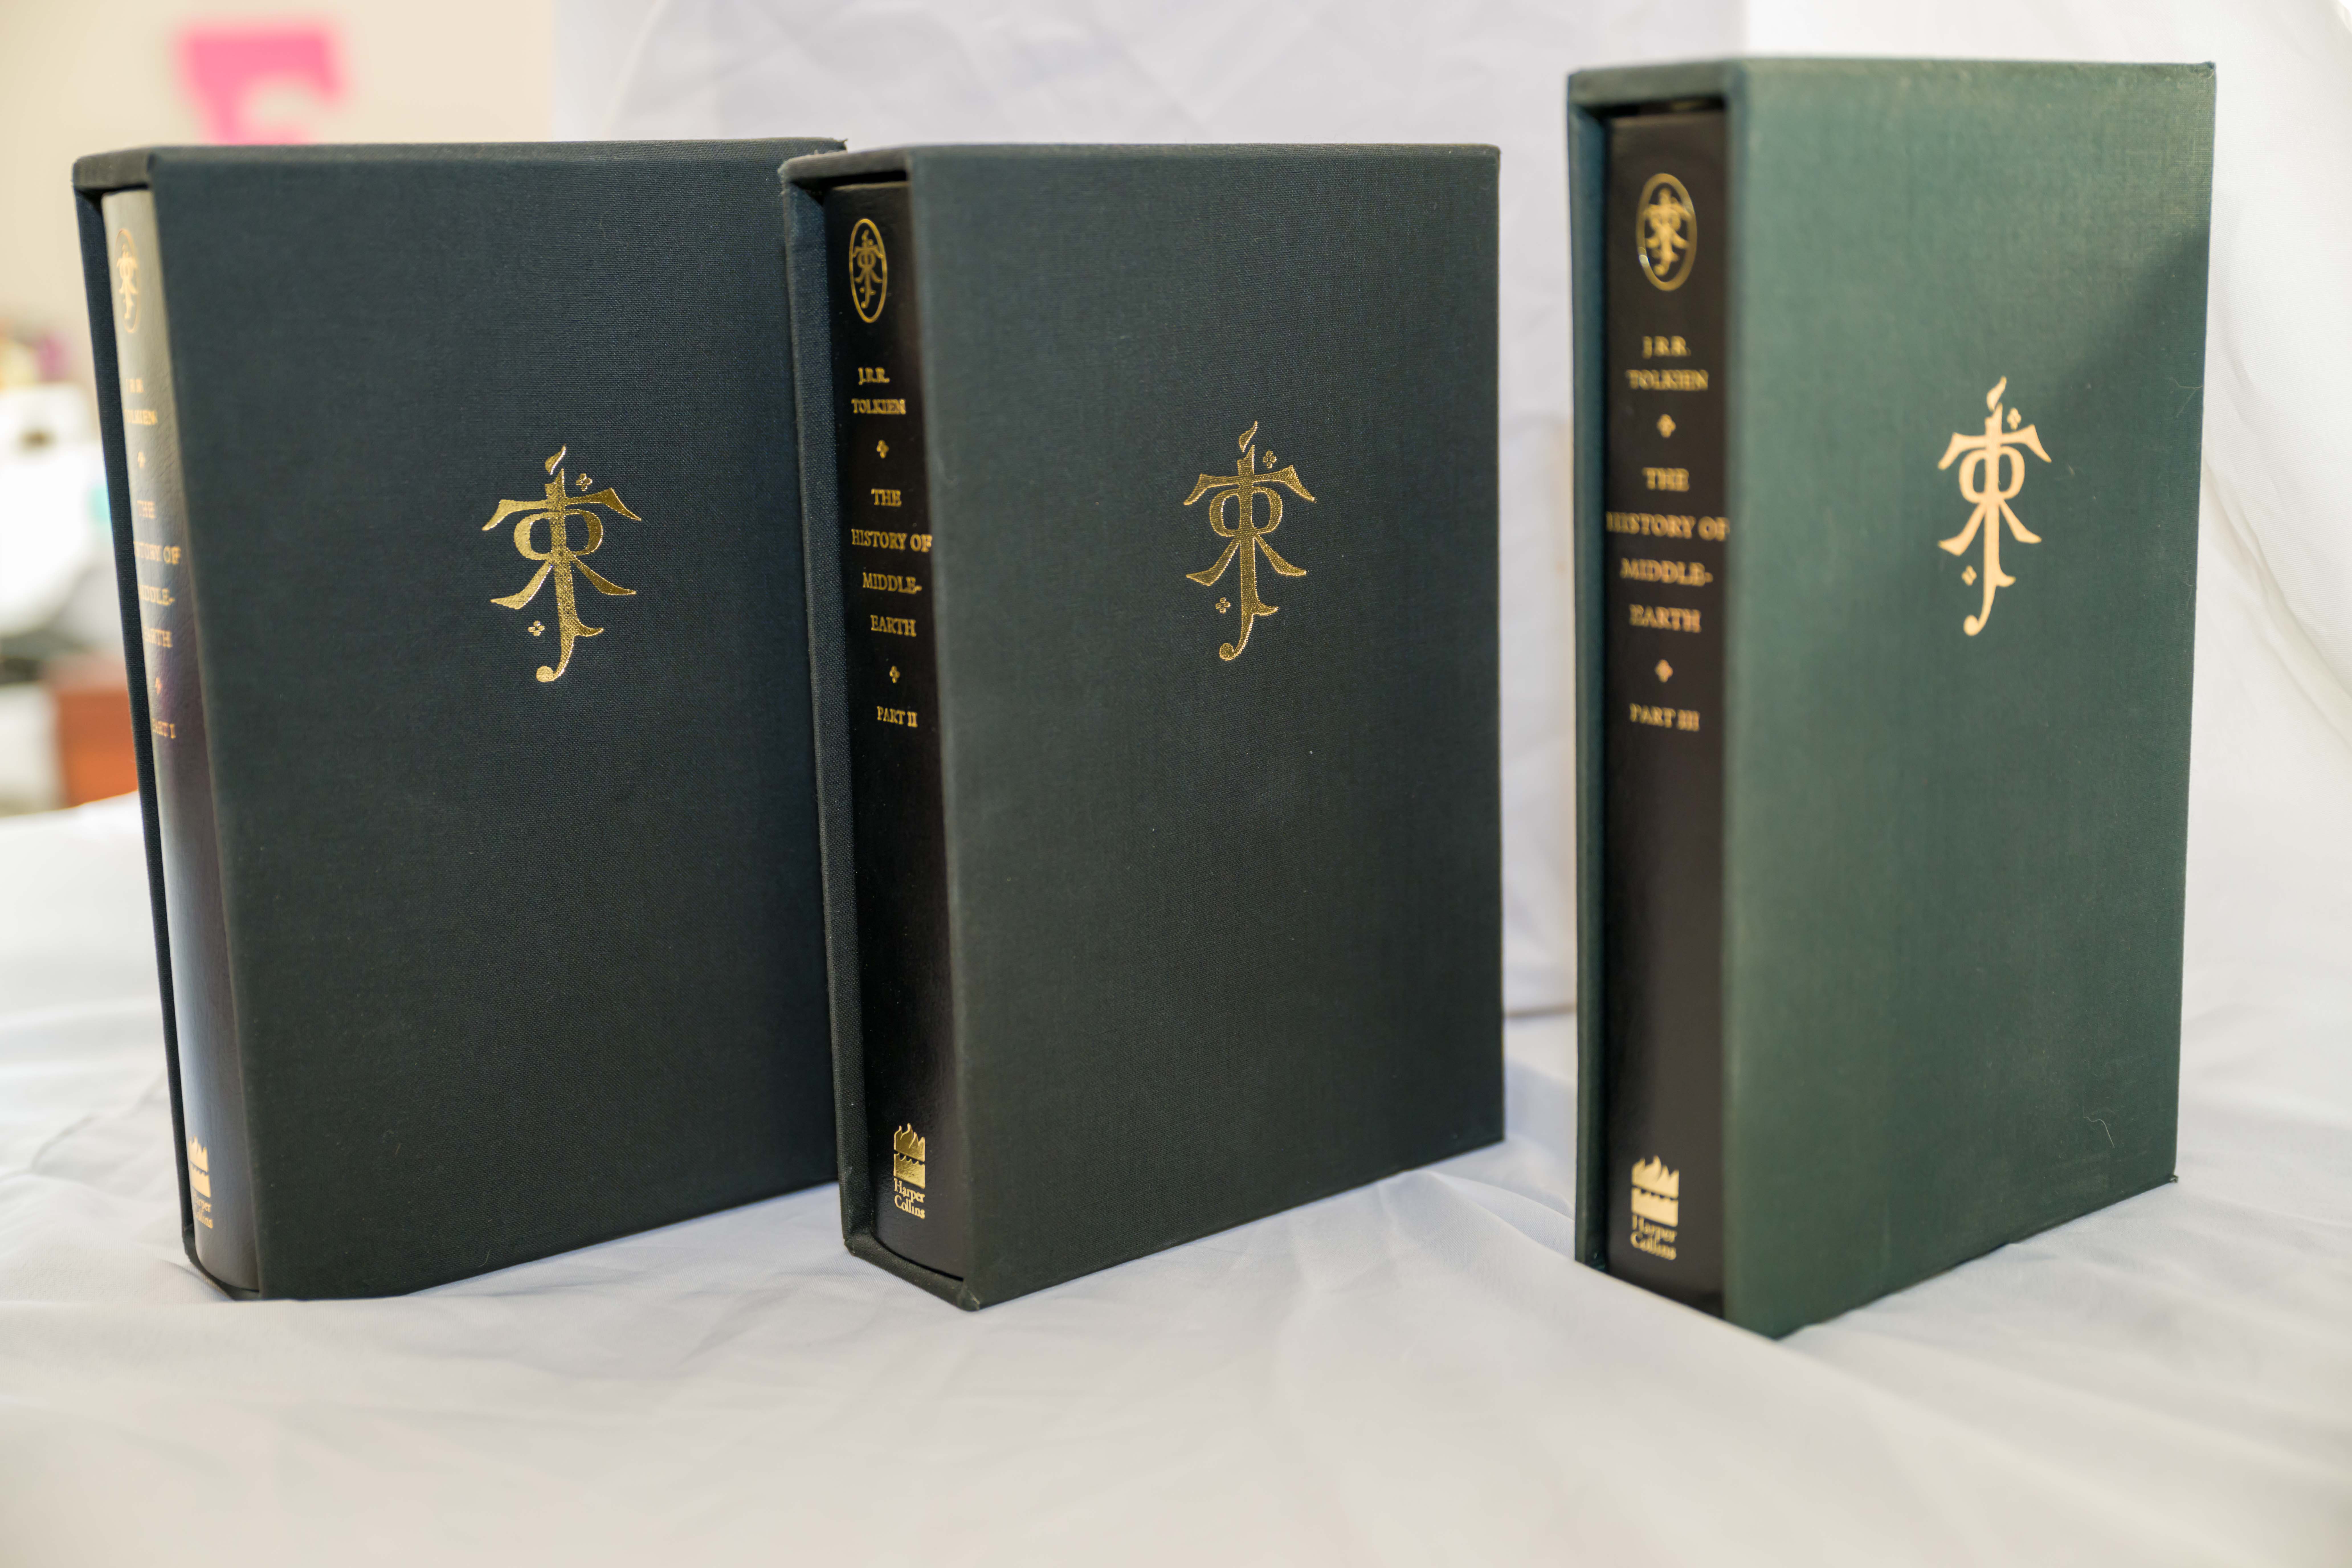 The History of Middle Earth: Deluxe Edition Set of Part 1, 2 and 3 3